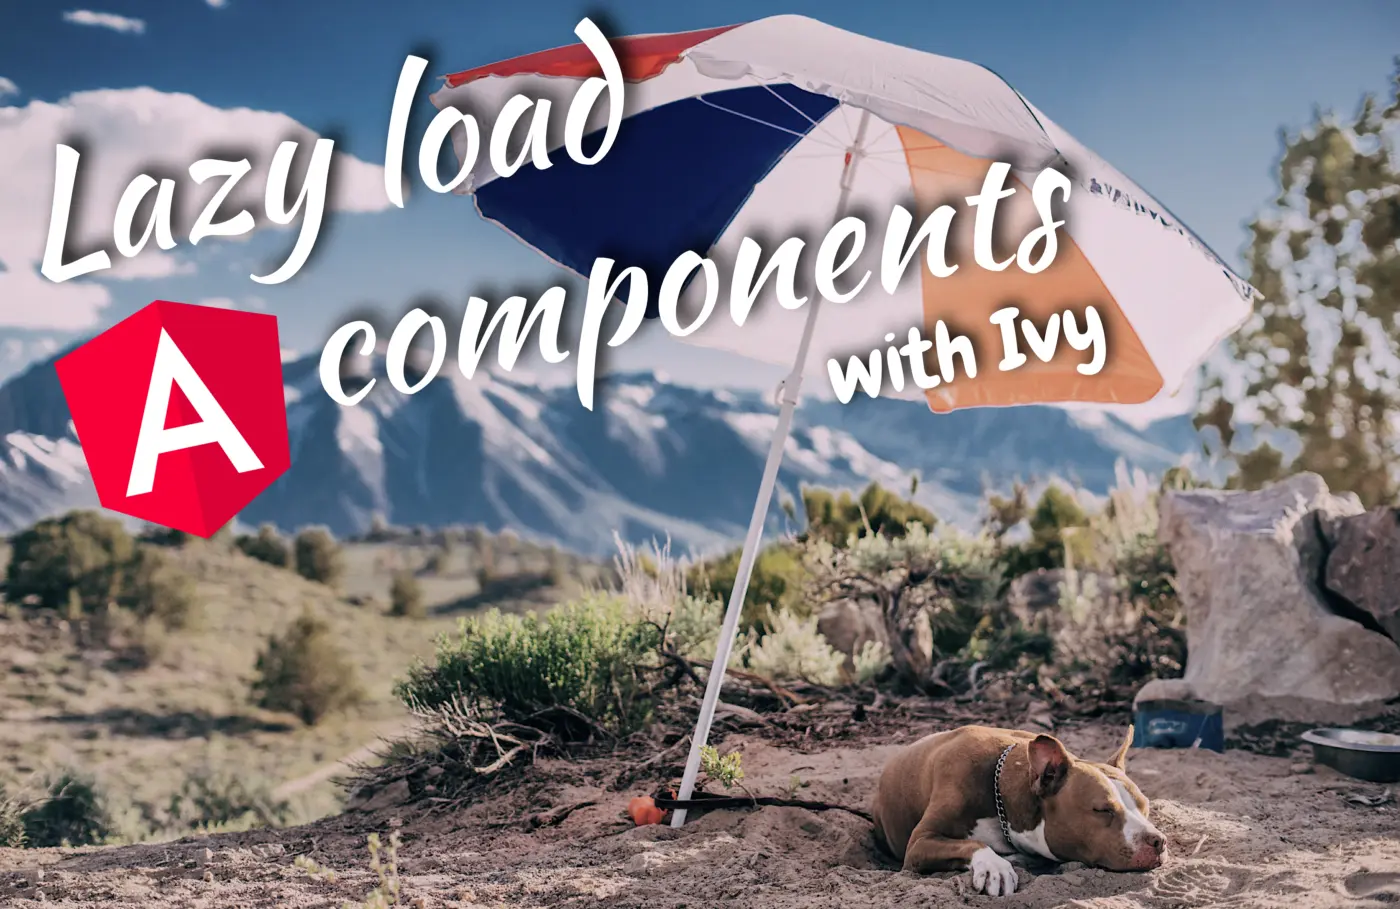 Blog post title image on how to lazy load Angular components